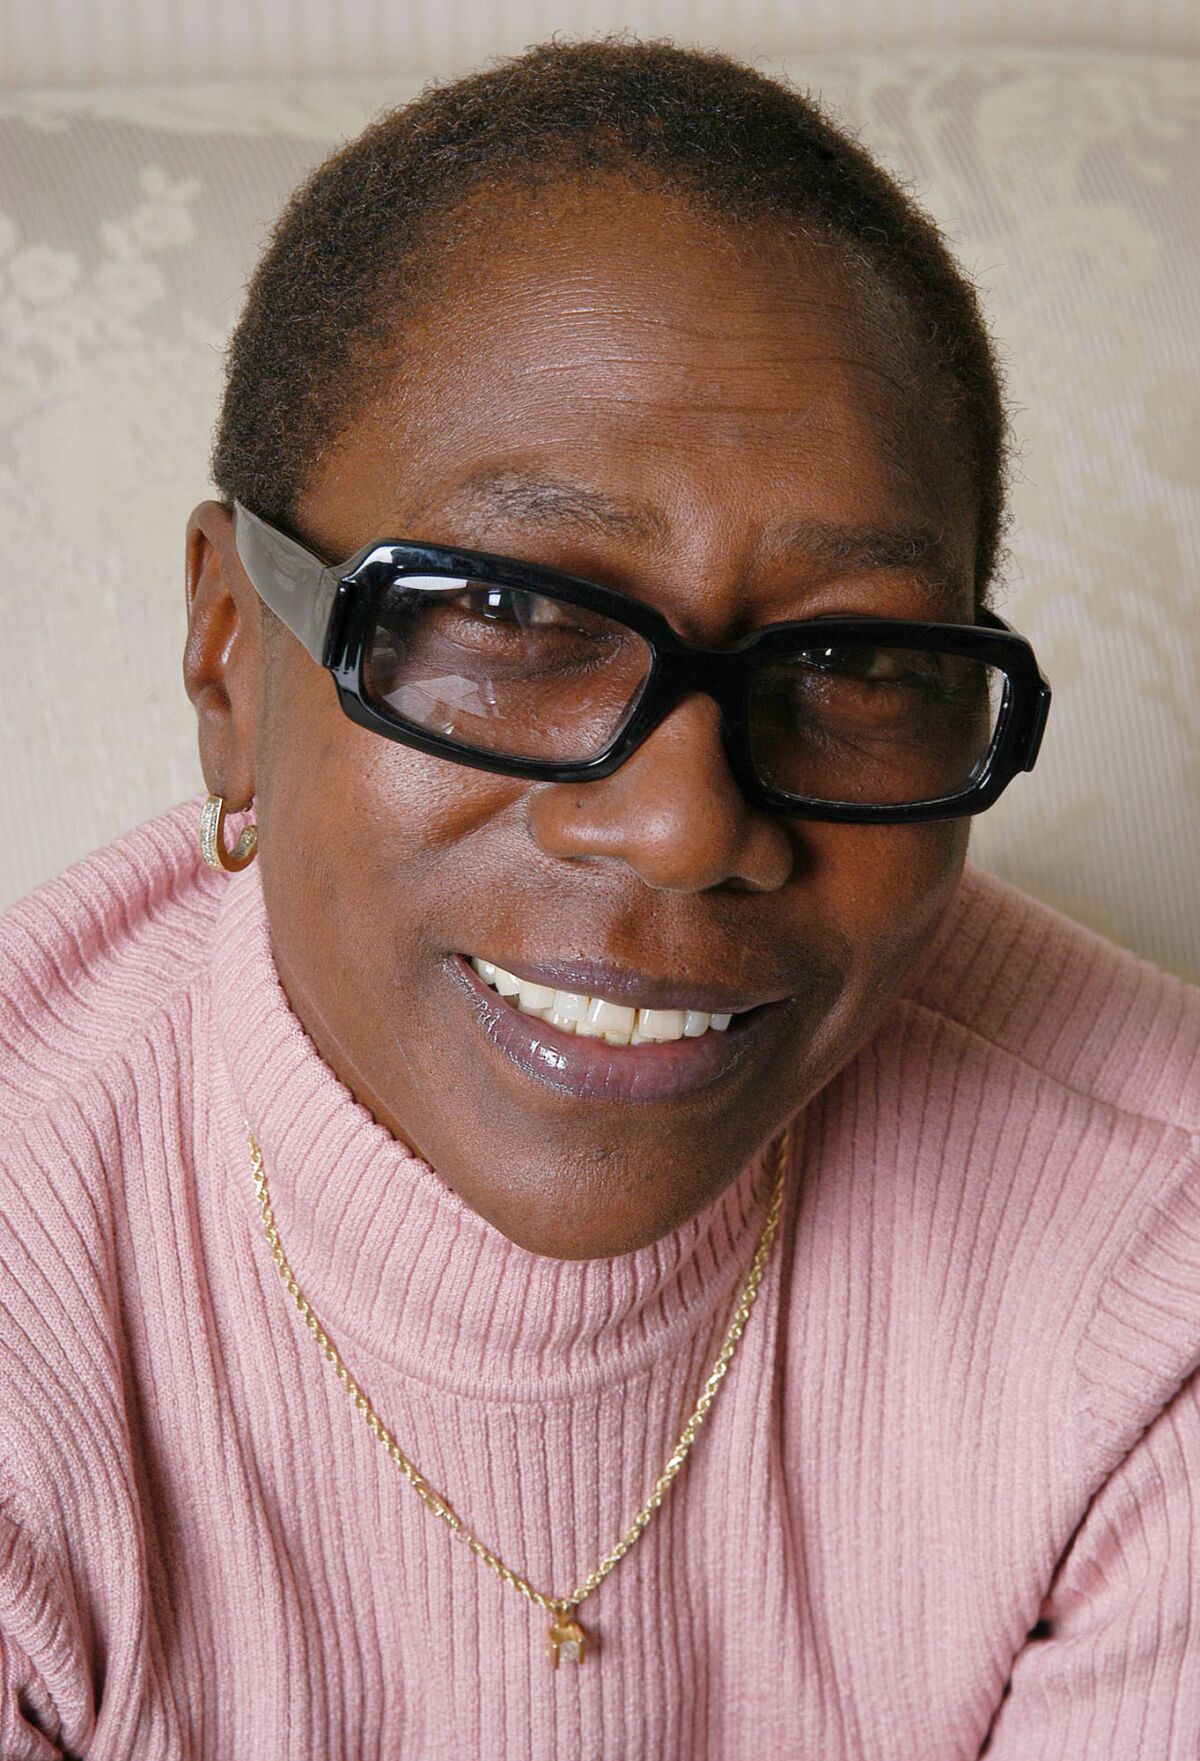 Afeni Shakur, 56-year-old mother of late rapper Tupac Shakur